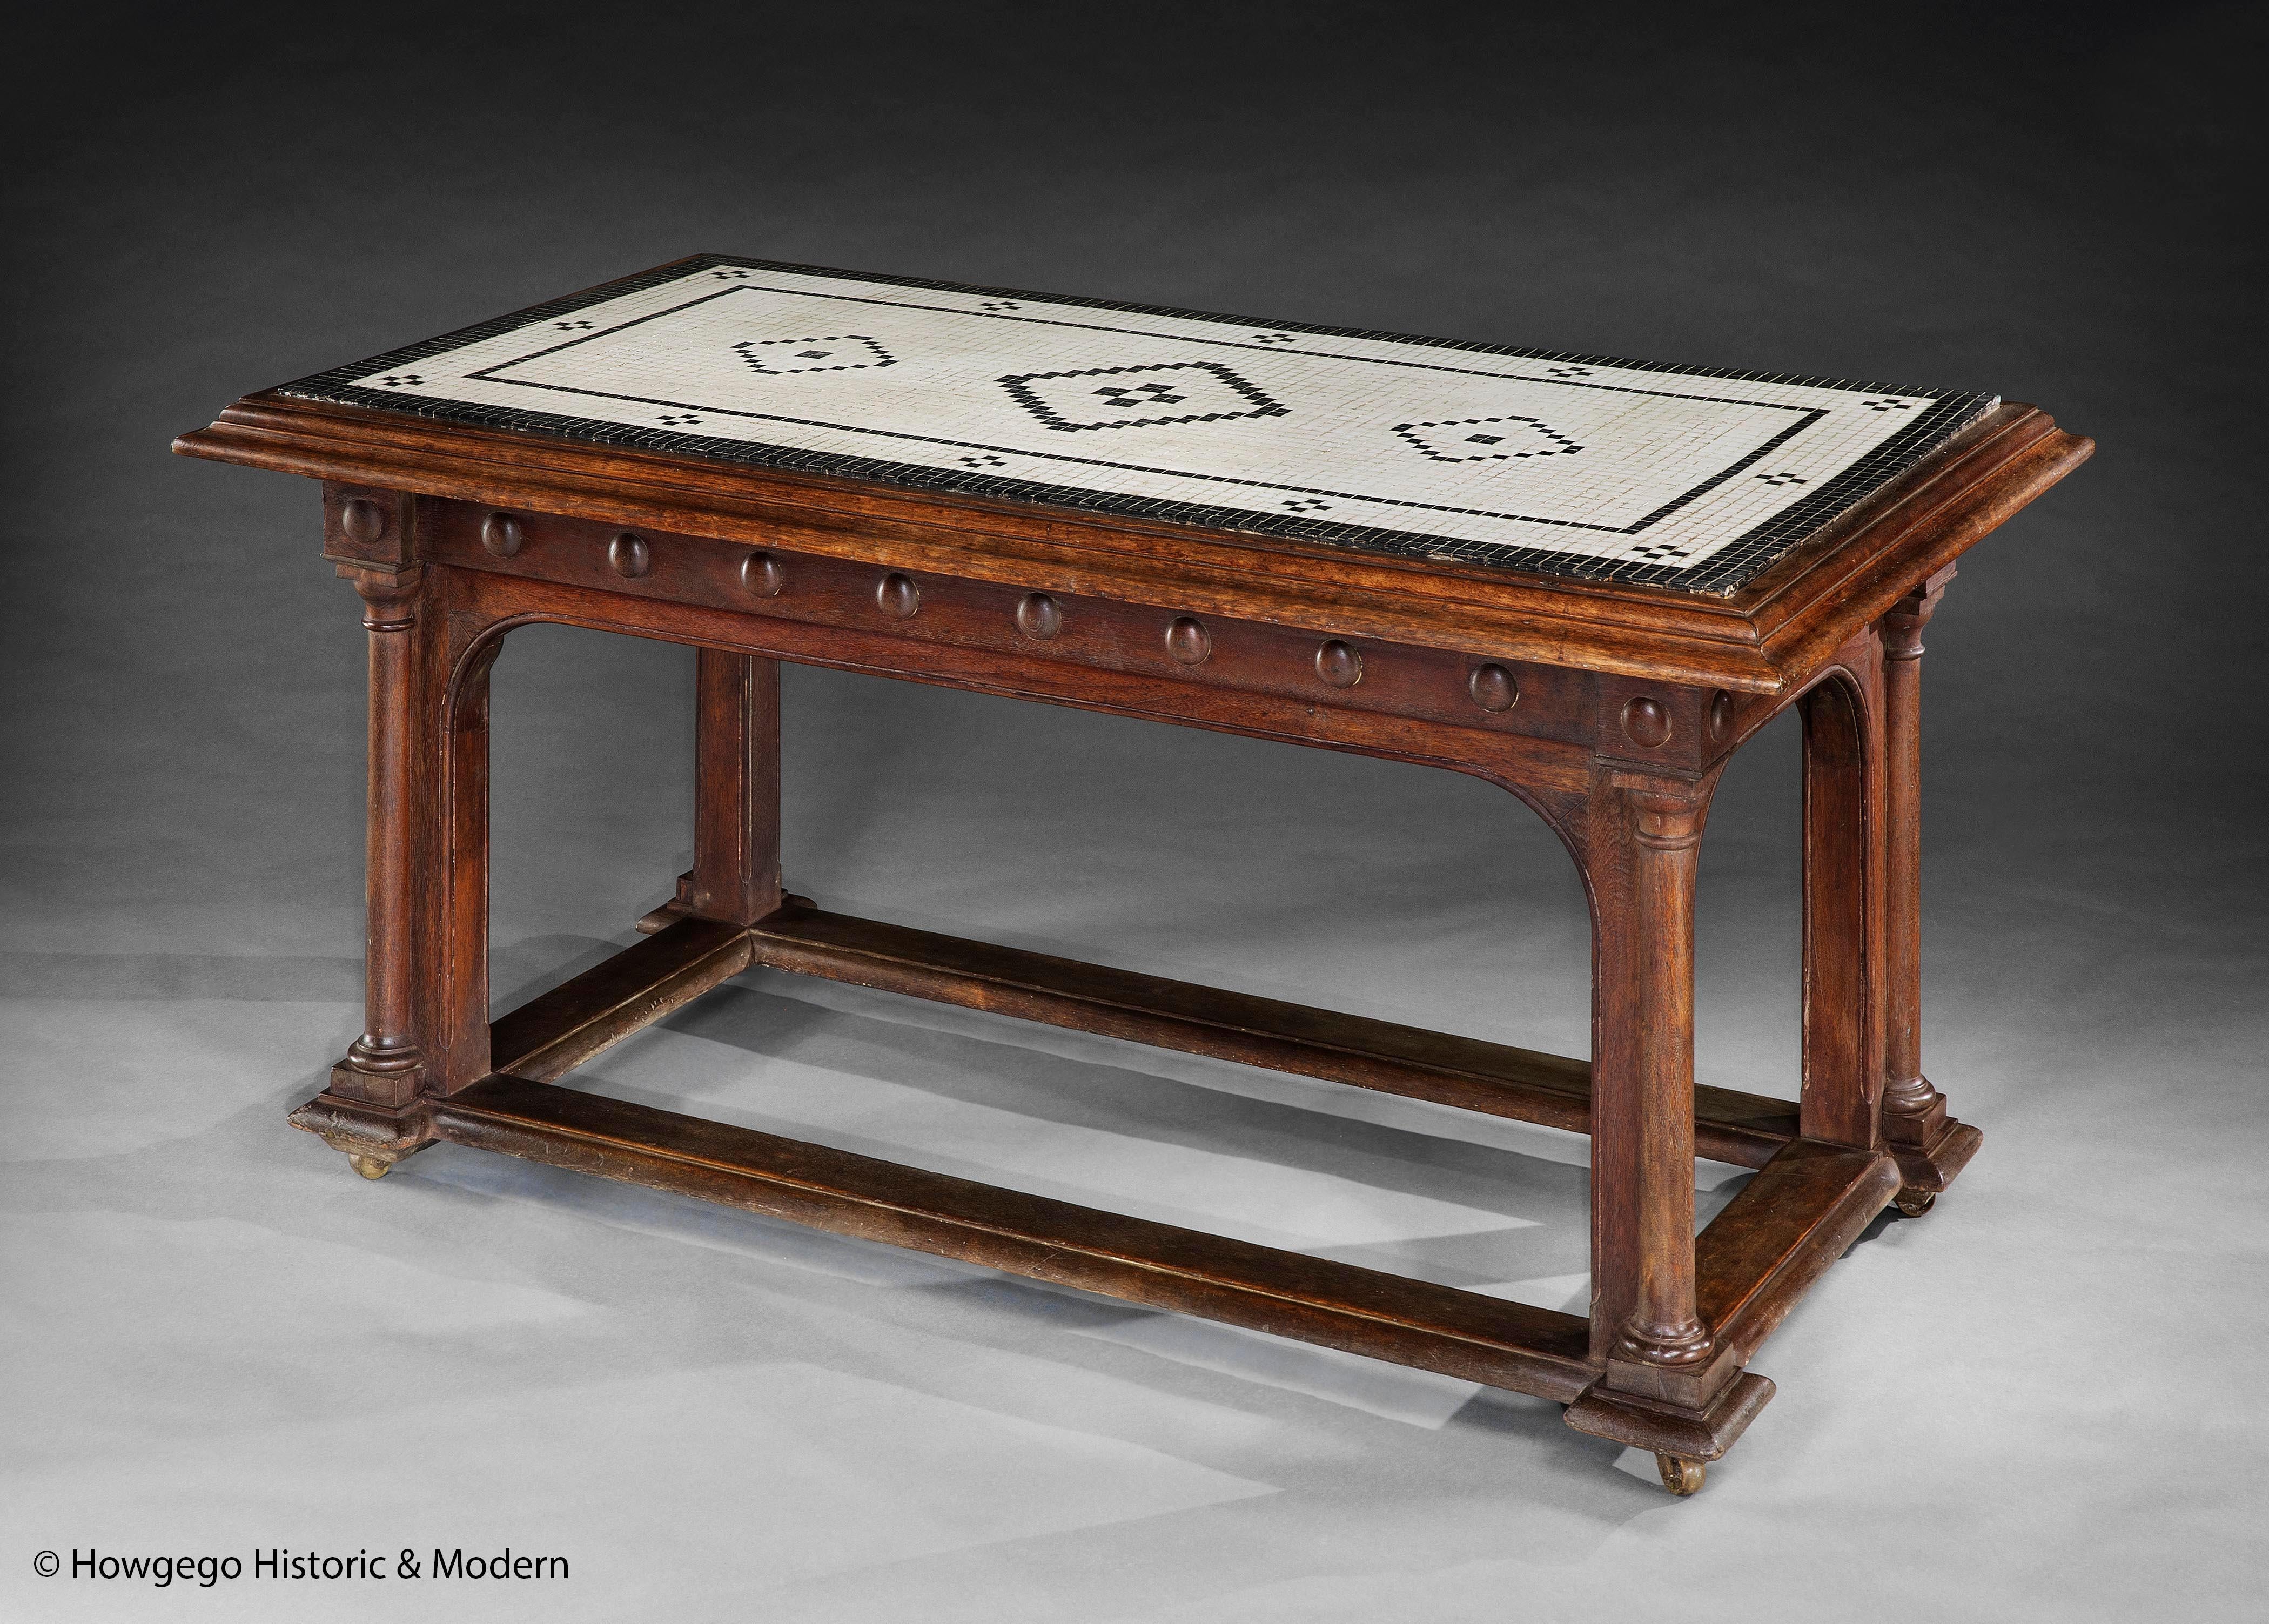 19th century Teak and Marble Antiquarian Centre Table in the Renaissance-style

Very unusual, possibly unique with the combination of teak and marble in the Renaissance-style
The architectural form and ornamentation echoing Renaissance designs
The